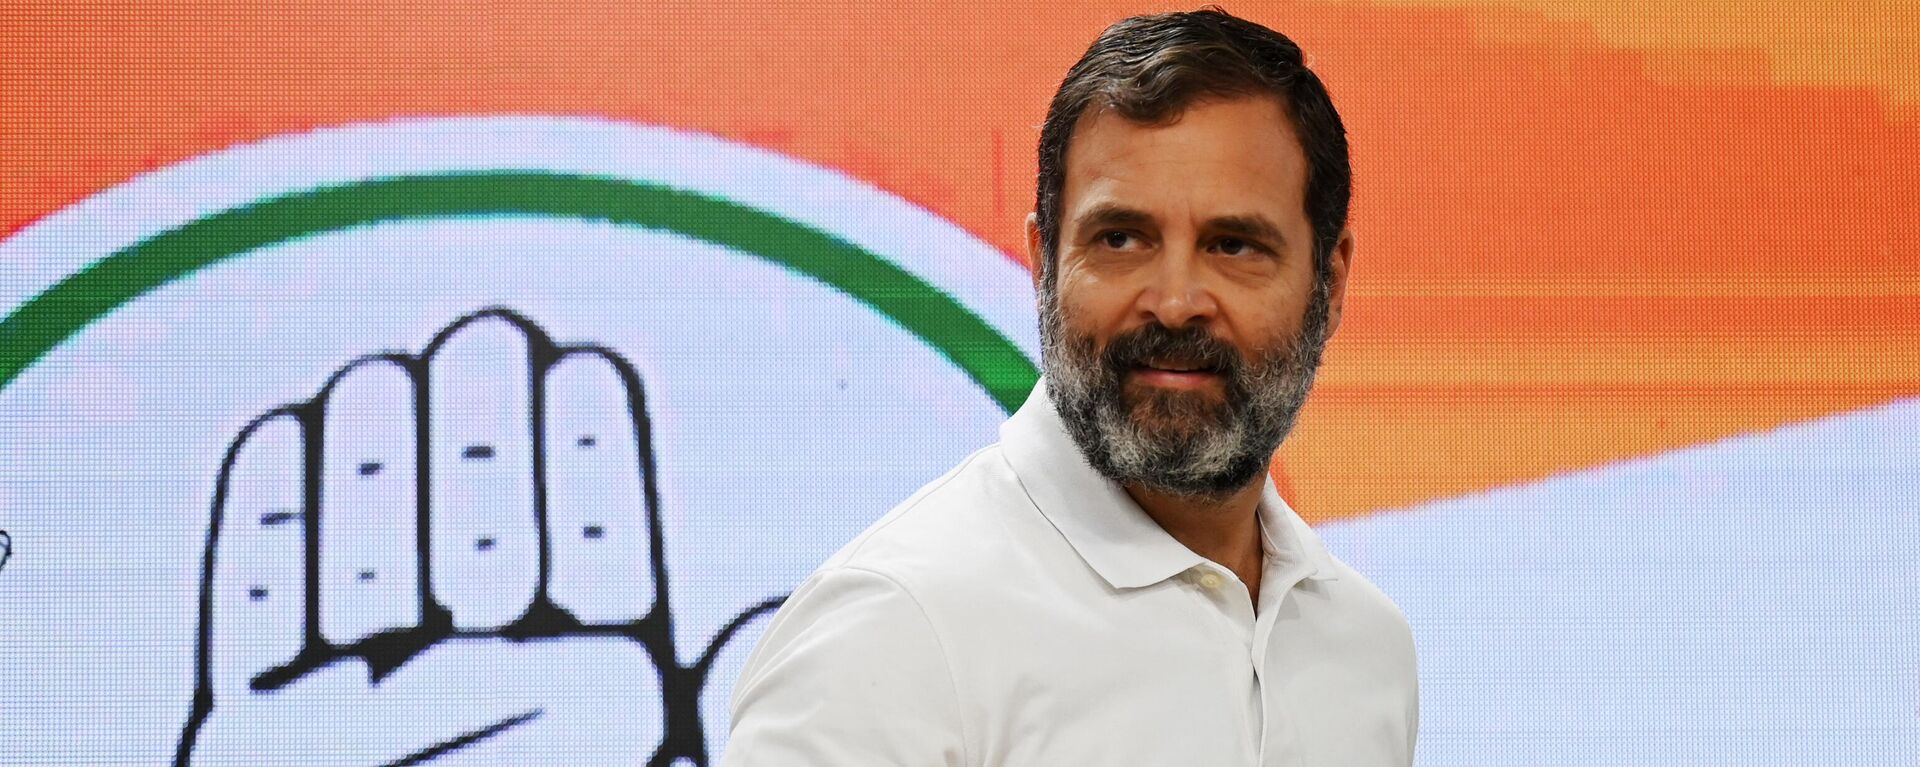 Congress party leader Rahul Gandhi arrives to address a press conference in New Delhi on March 25, 2023, after being disqualified as a member of parliament. - Sputnik India, 1920, 03.04.2023